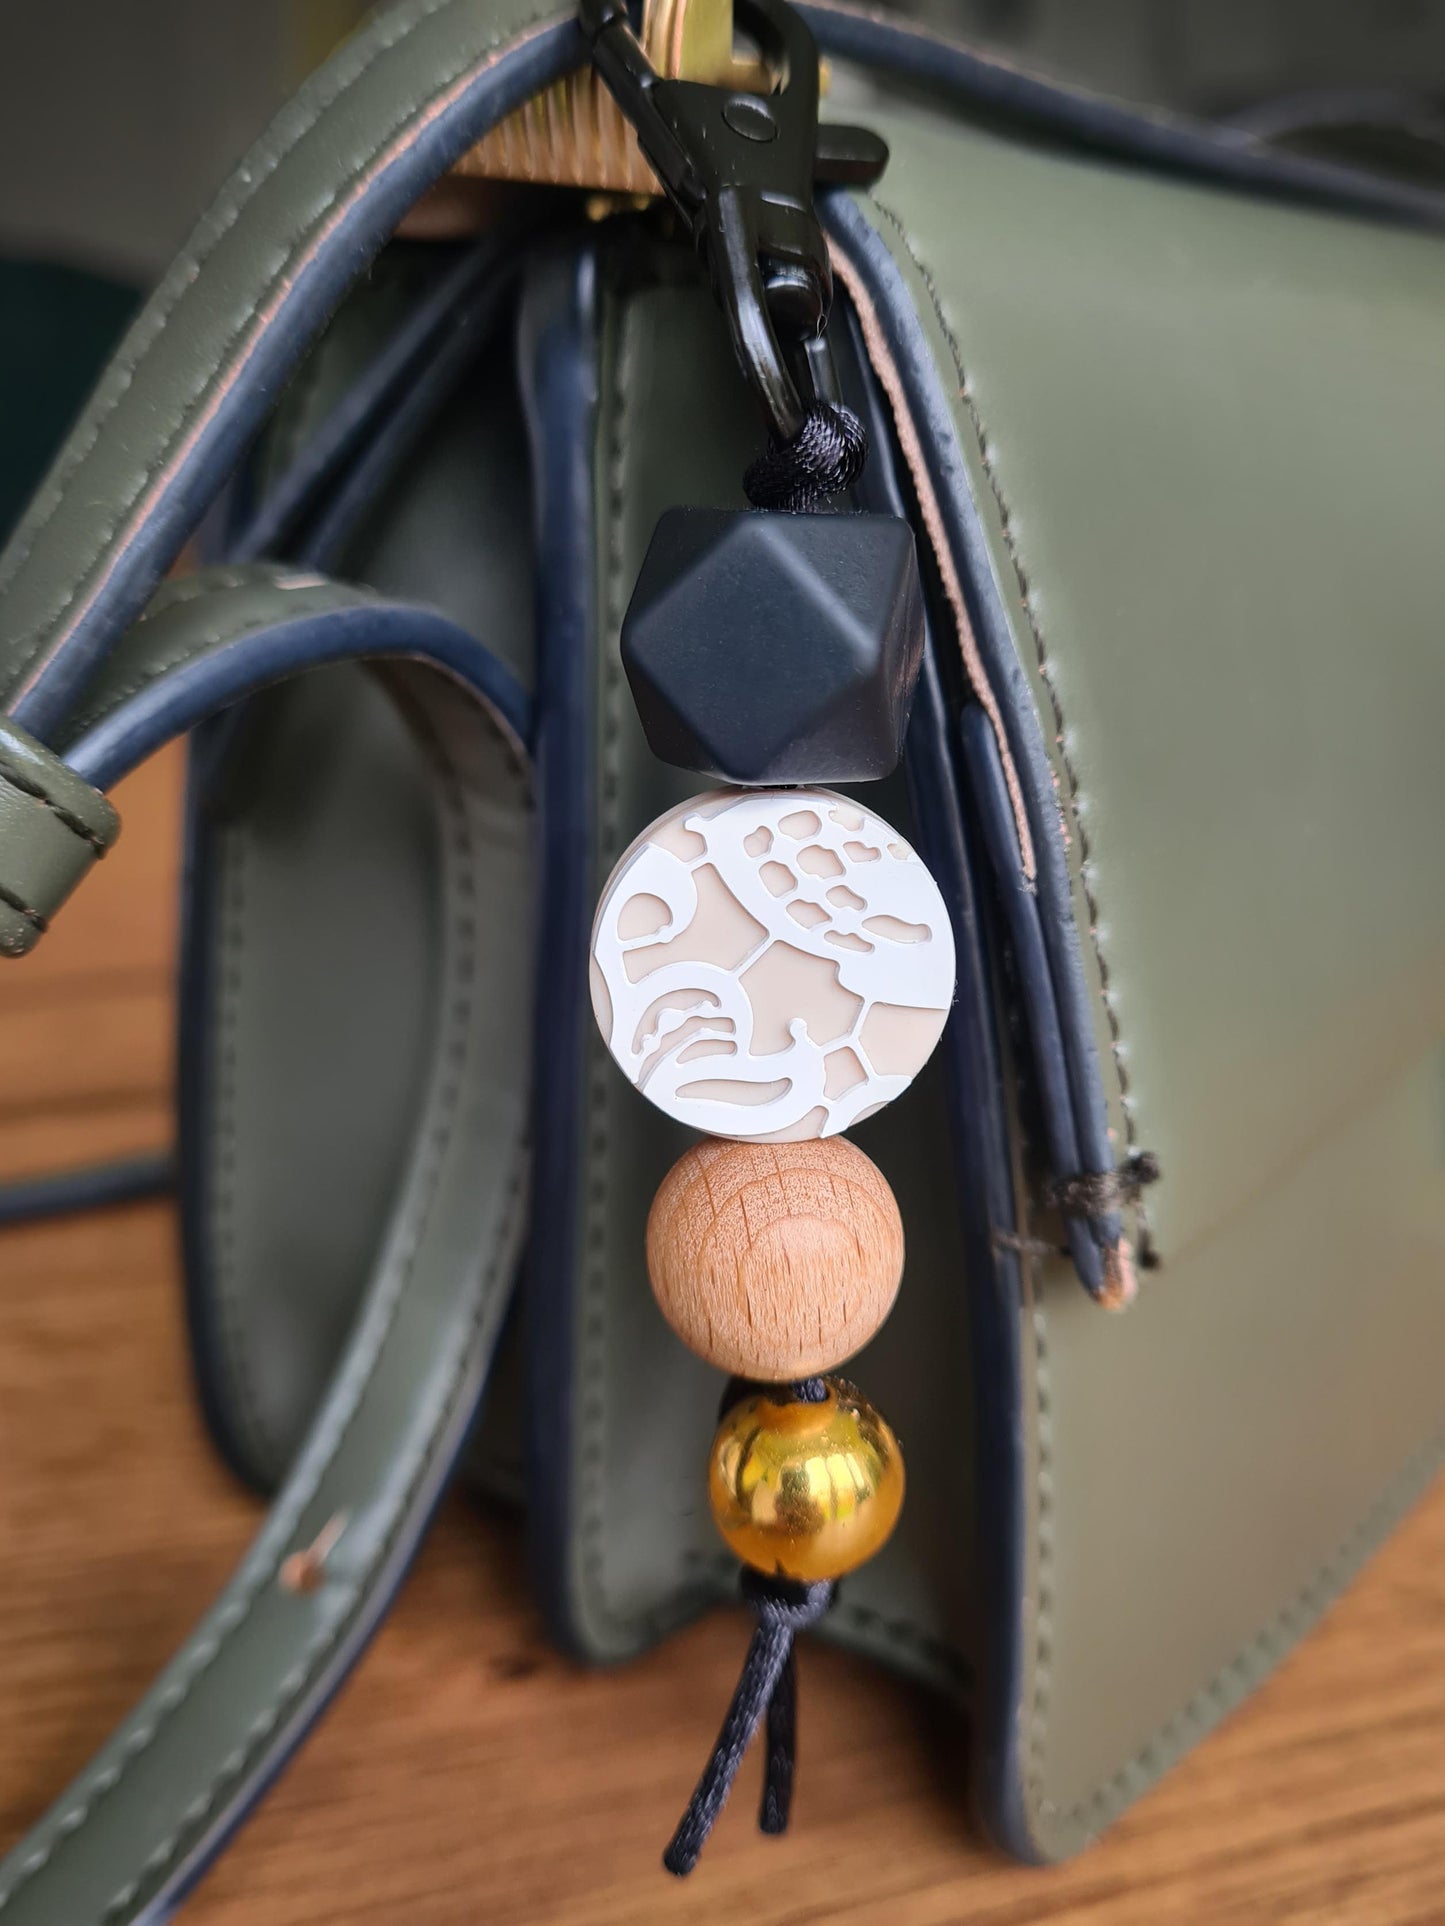 Our stylish keychains can be attached to baby changing bags, backpacks or to your keys! With the flexible design, they are easy to grip and use as zip pullers. 